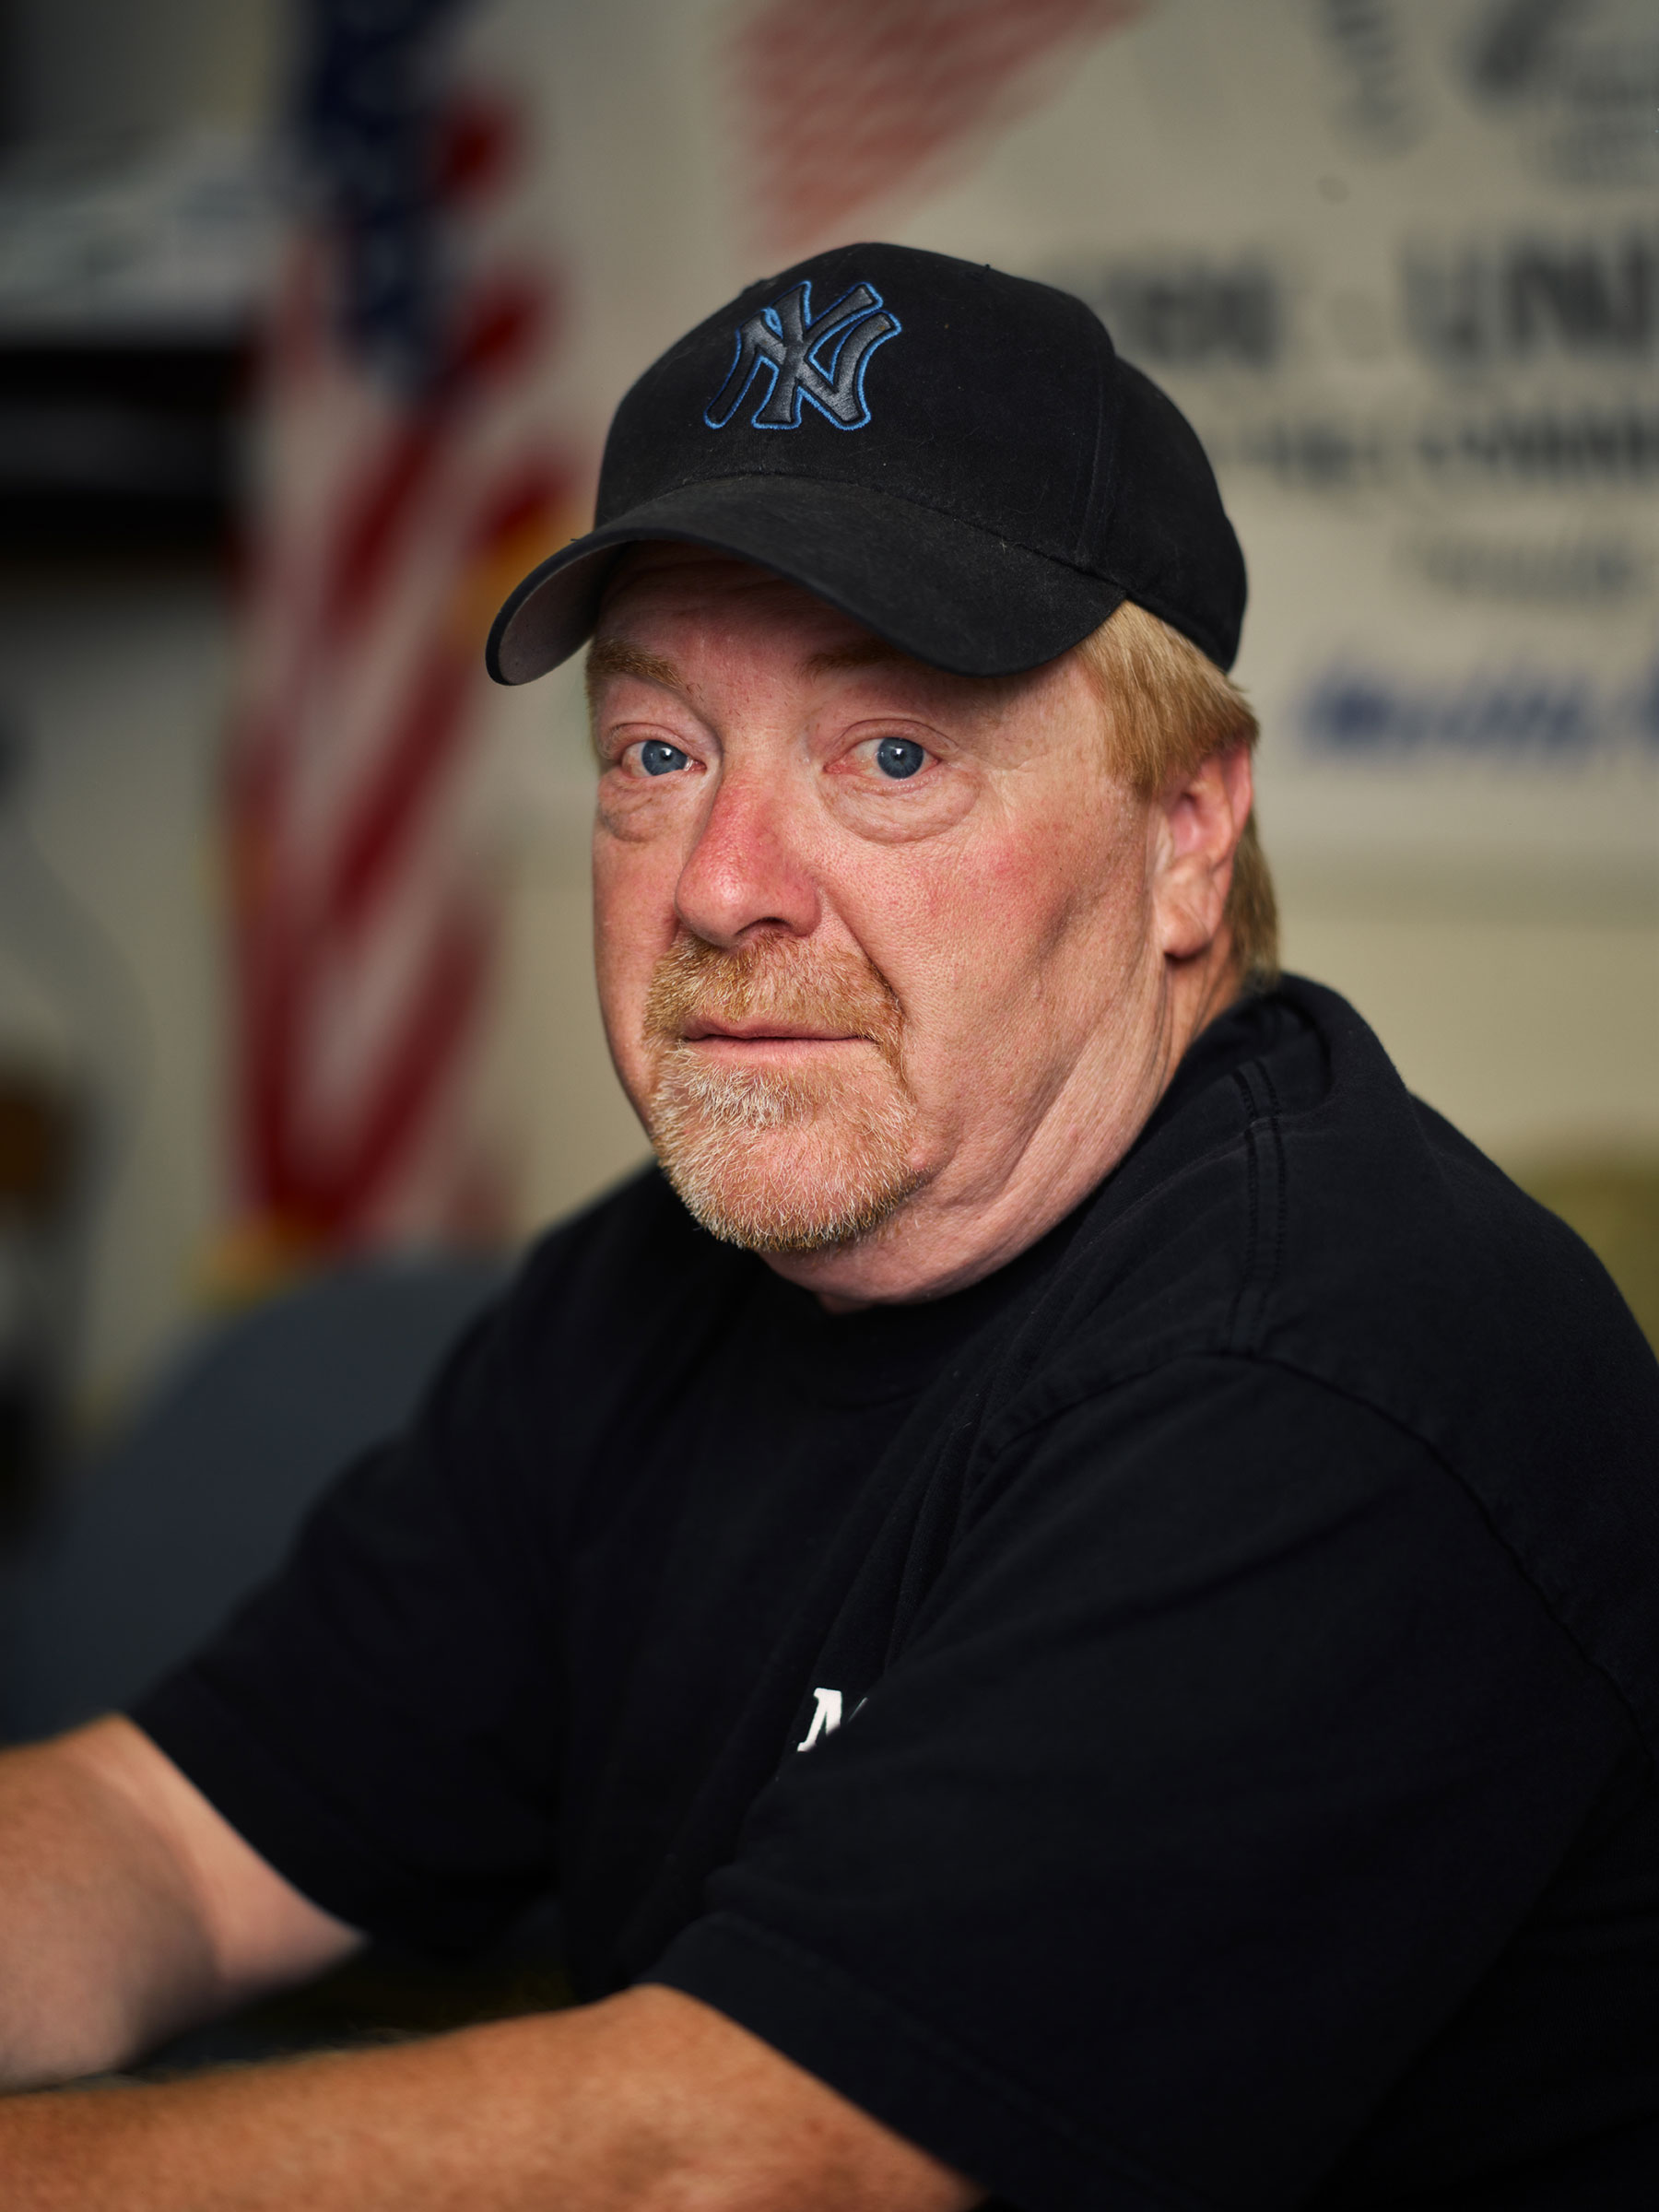 Frank “Rusty” Brown has worked at the Remington Arms factory since 1995. (Jason Koxvold for TIME)